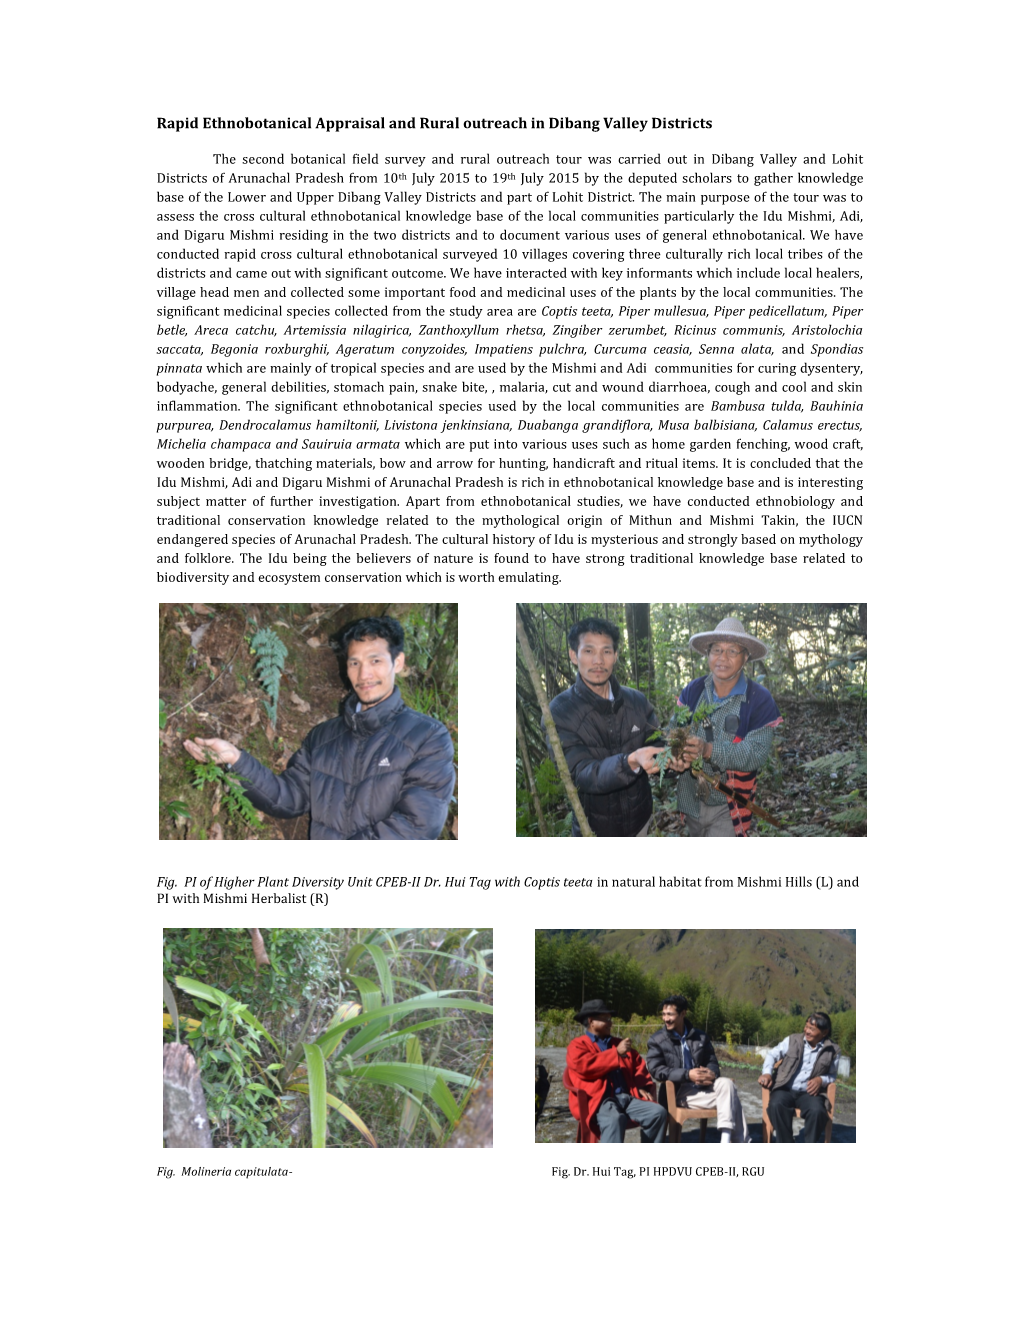 Rapid Ethnobotanical Appraisal and Rural Outreach in Dibang Valley Districts